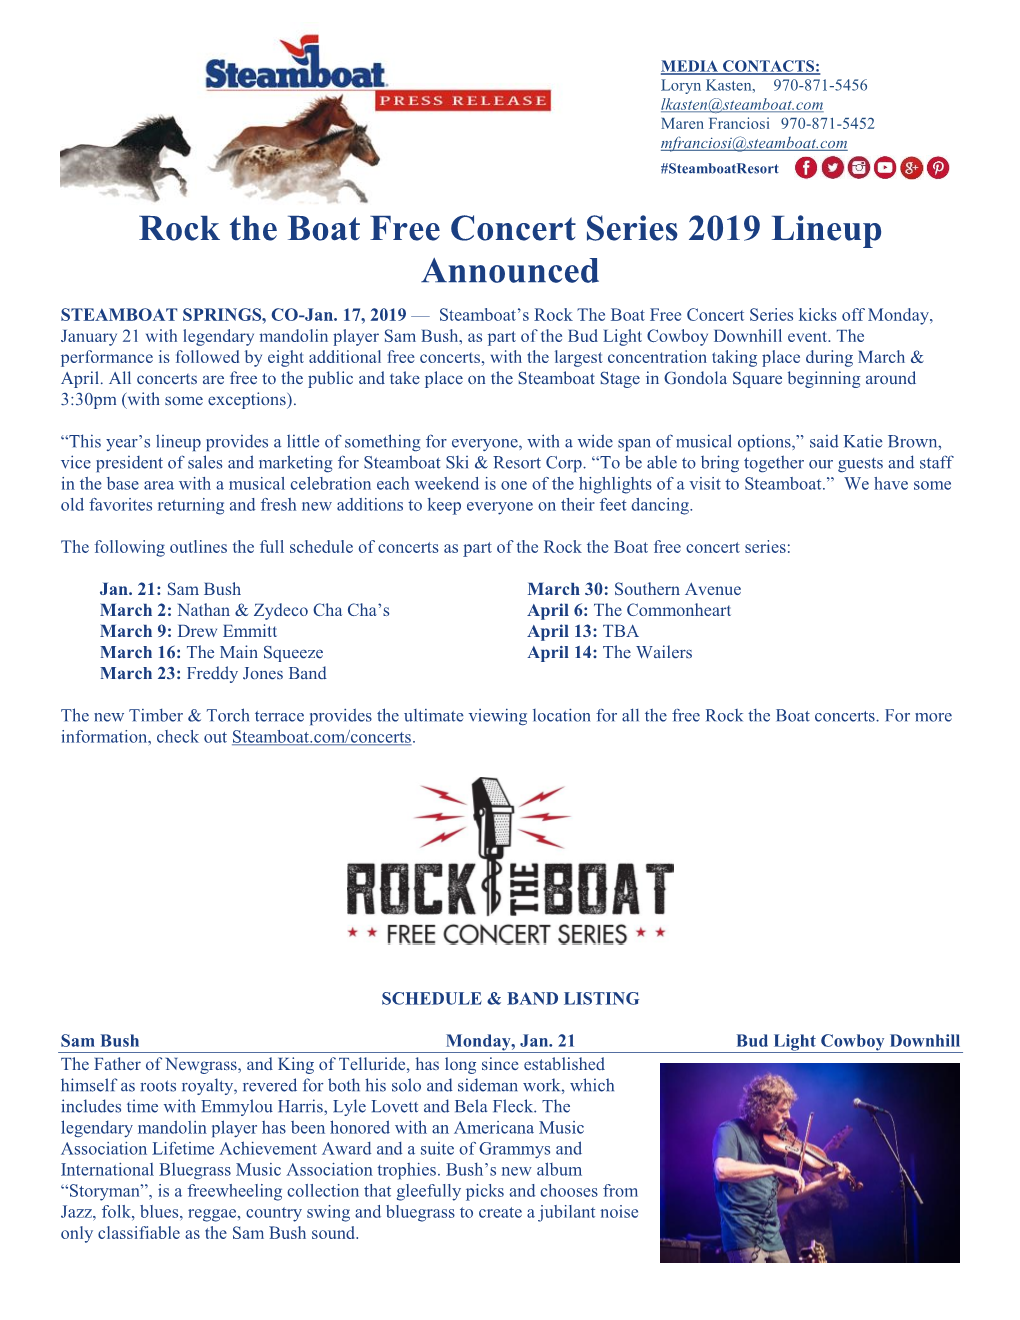 Rock the Boat Free Concert Series 2019 Lineup Announced